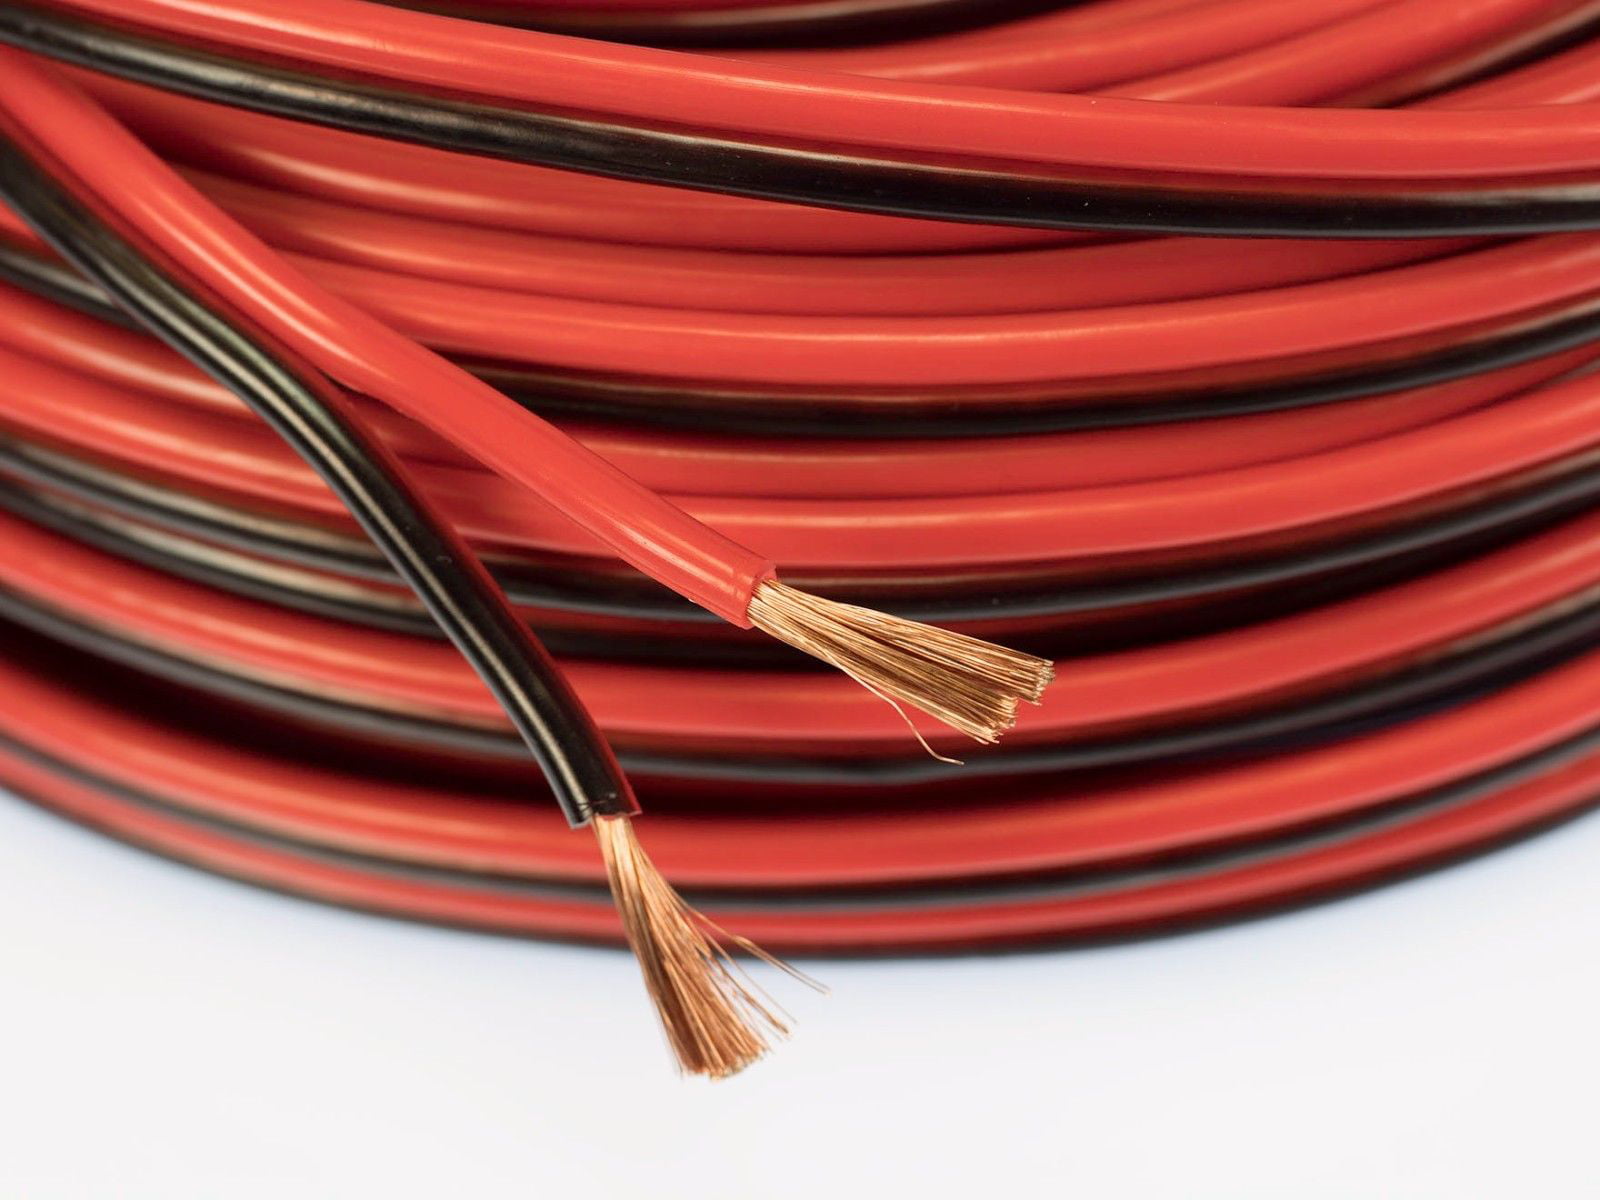 Made in The USA Red/Black Conductor White PVC Jacket Tinned Copper Boat Cable 14/2 AWG Duplex Flat DC Marine Wire